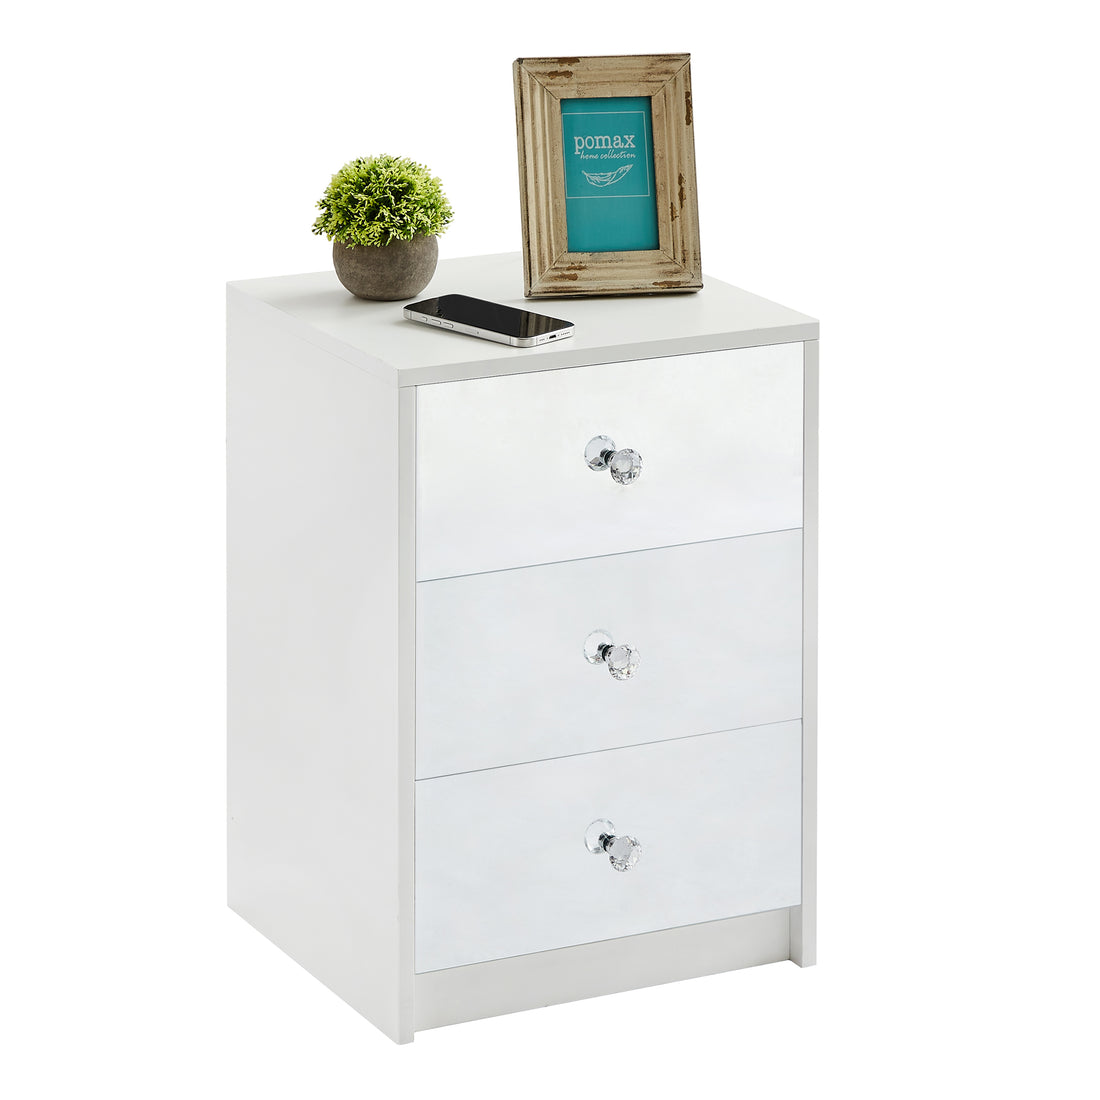 3 Drawer Nightstand For Bedroom, Modern Wood And